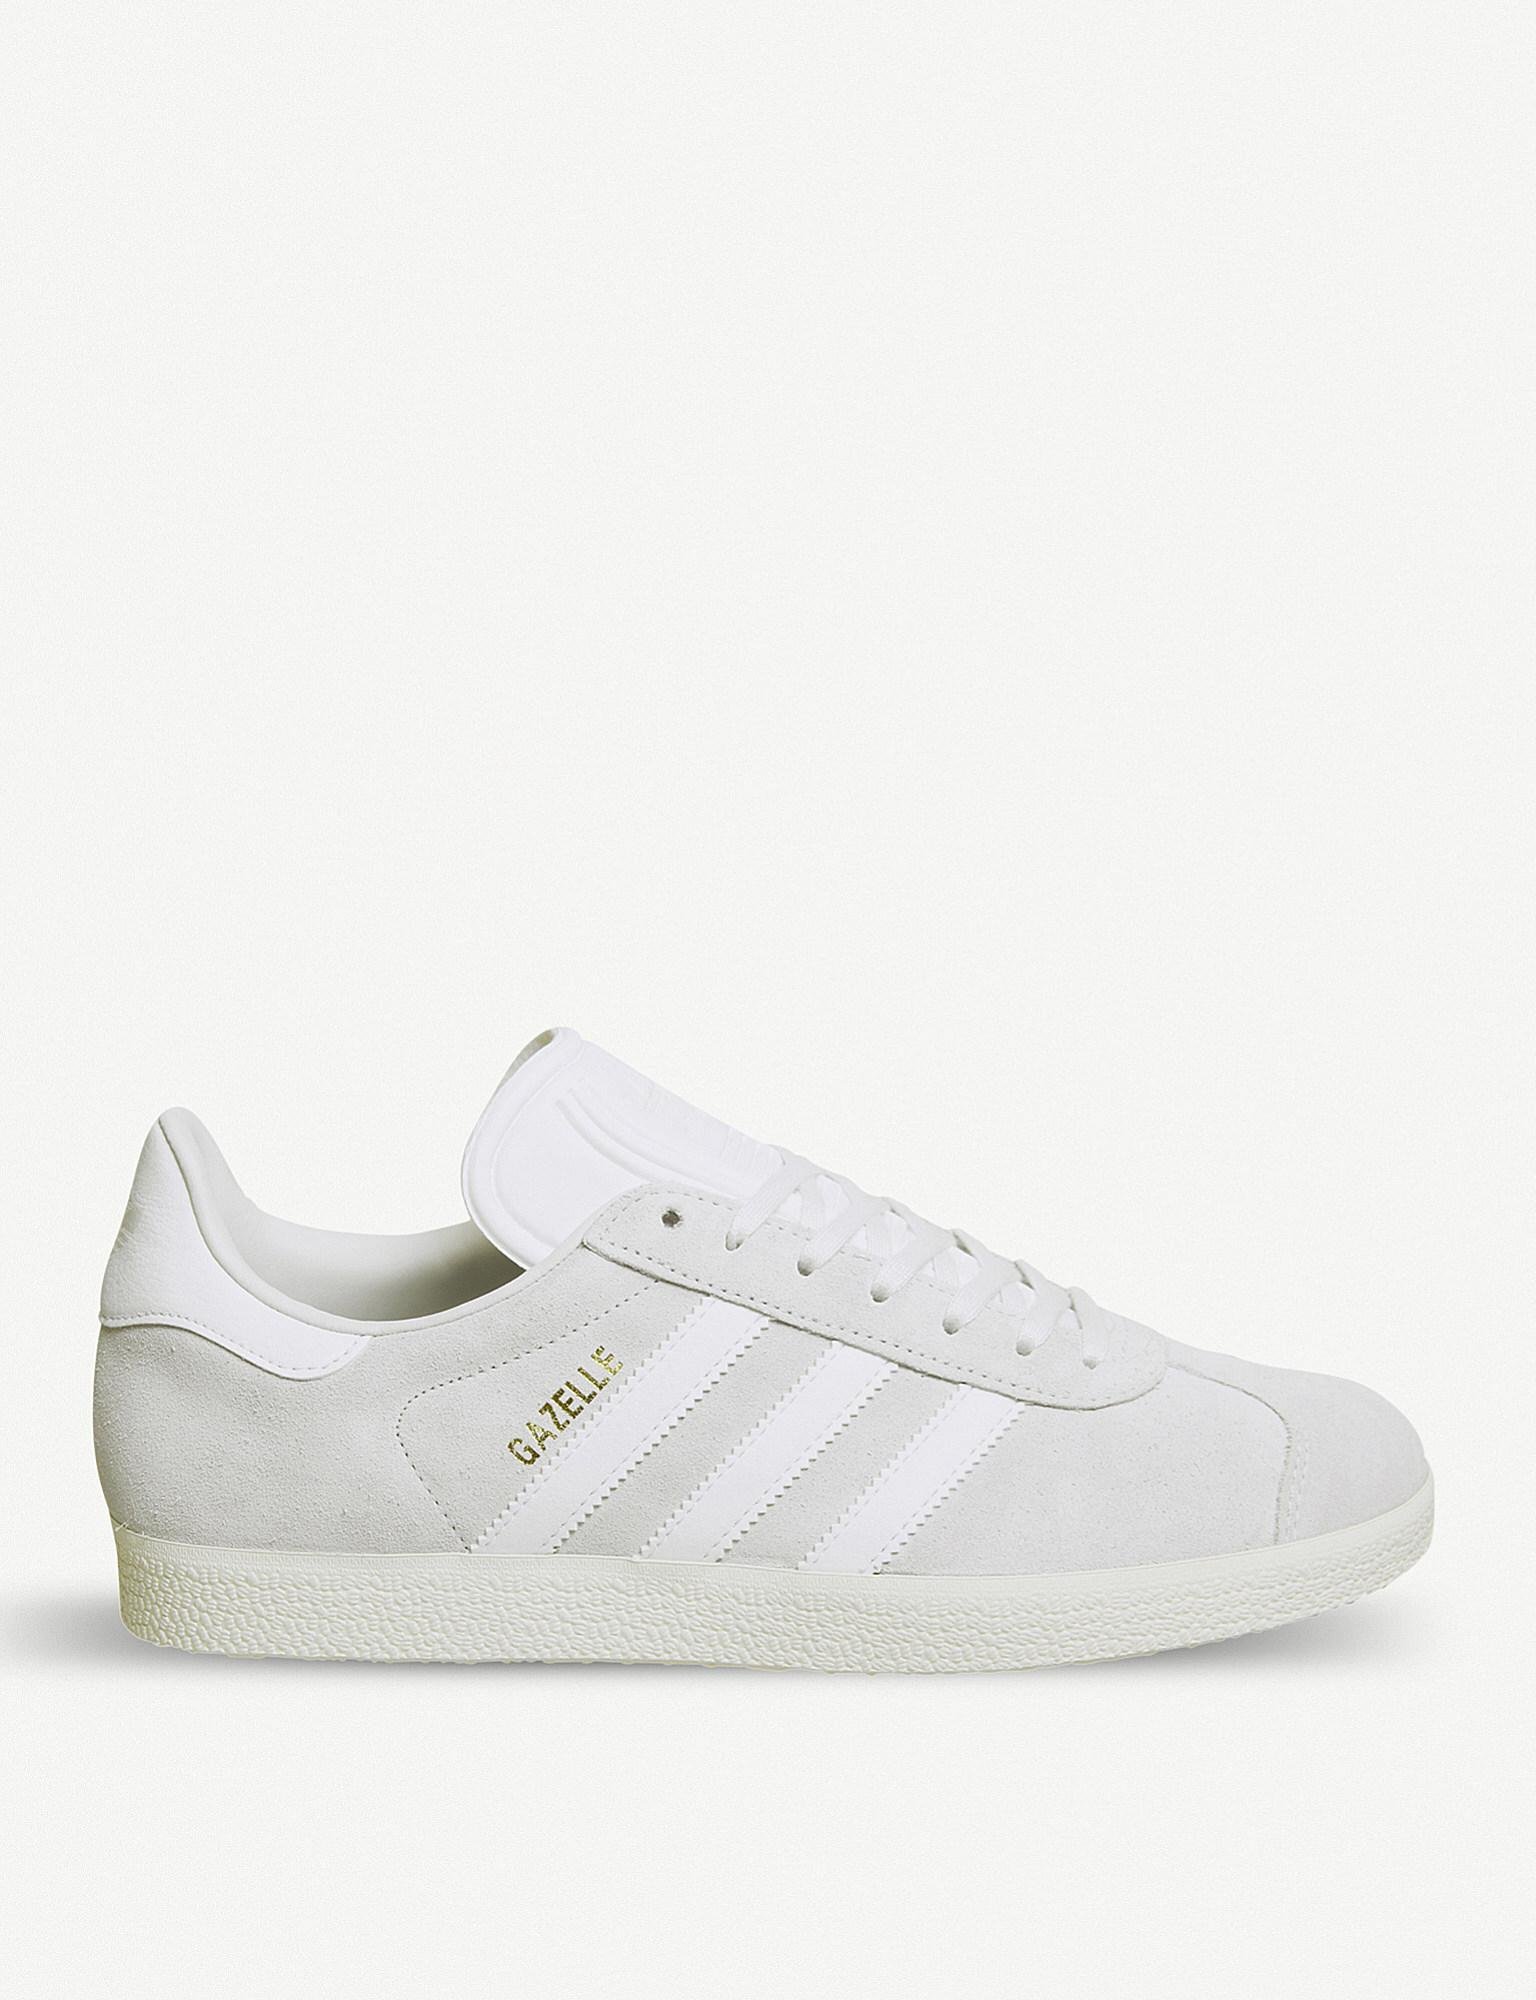 adidas Gazelle Suede Trainers in Crystal White (White) for Men - Lyst